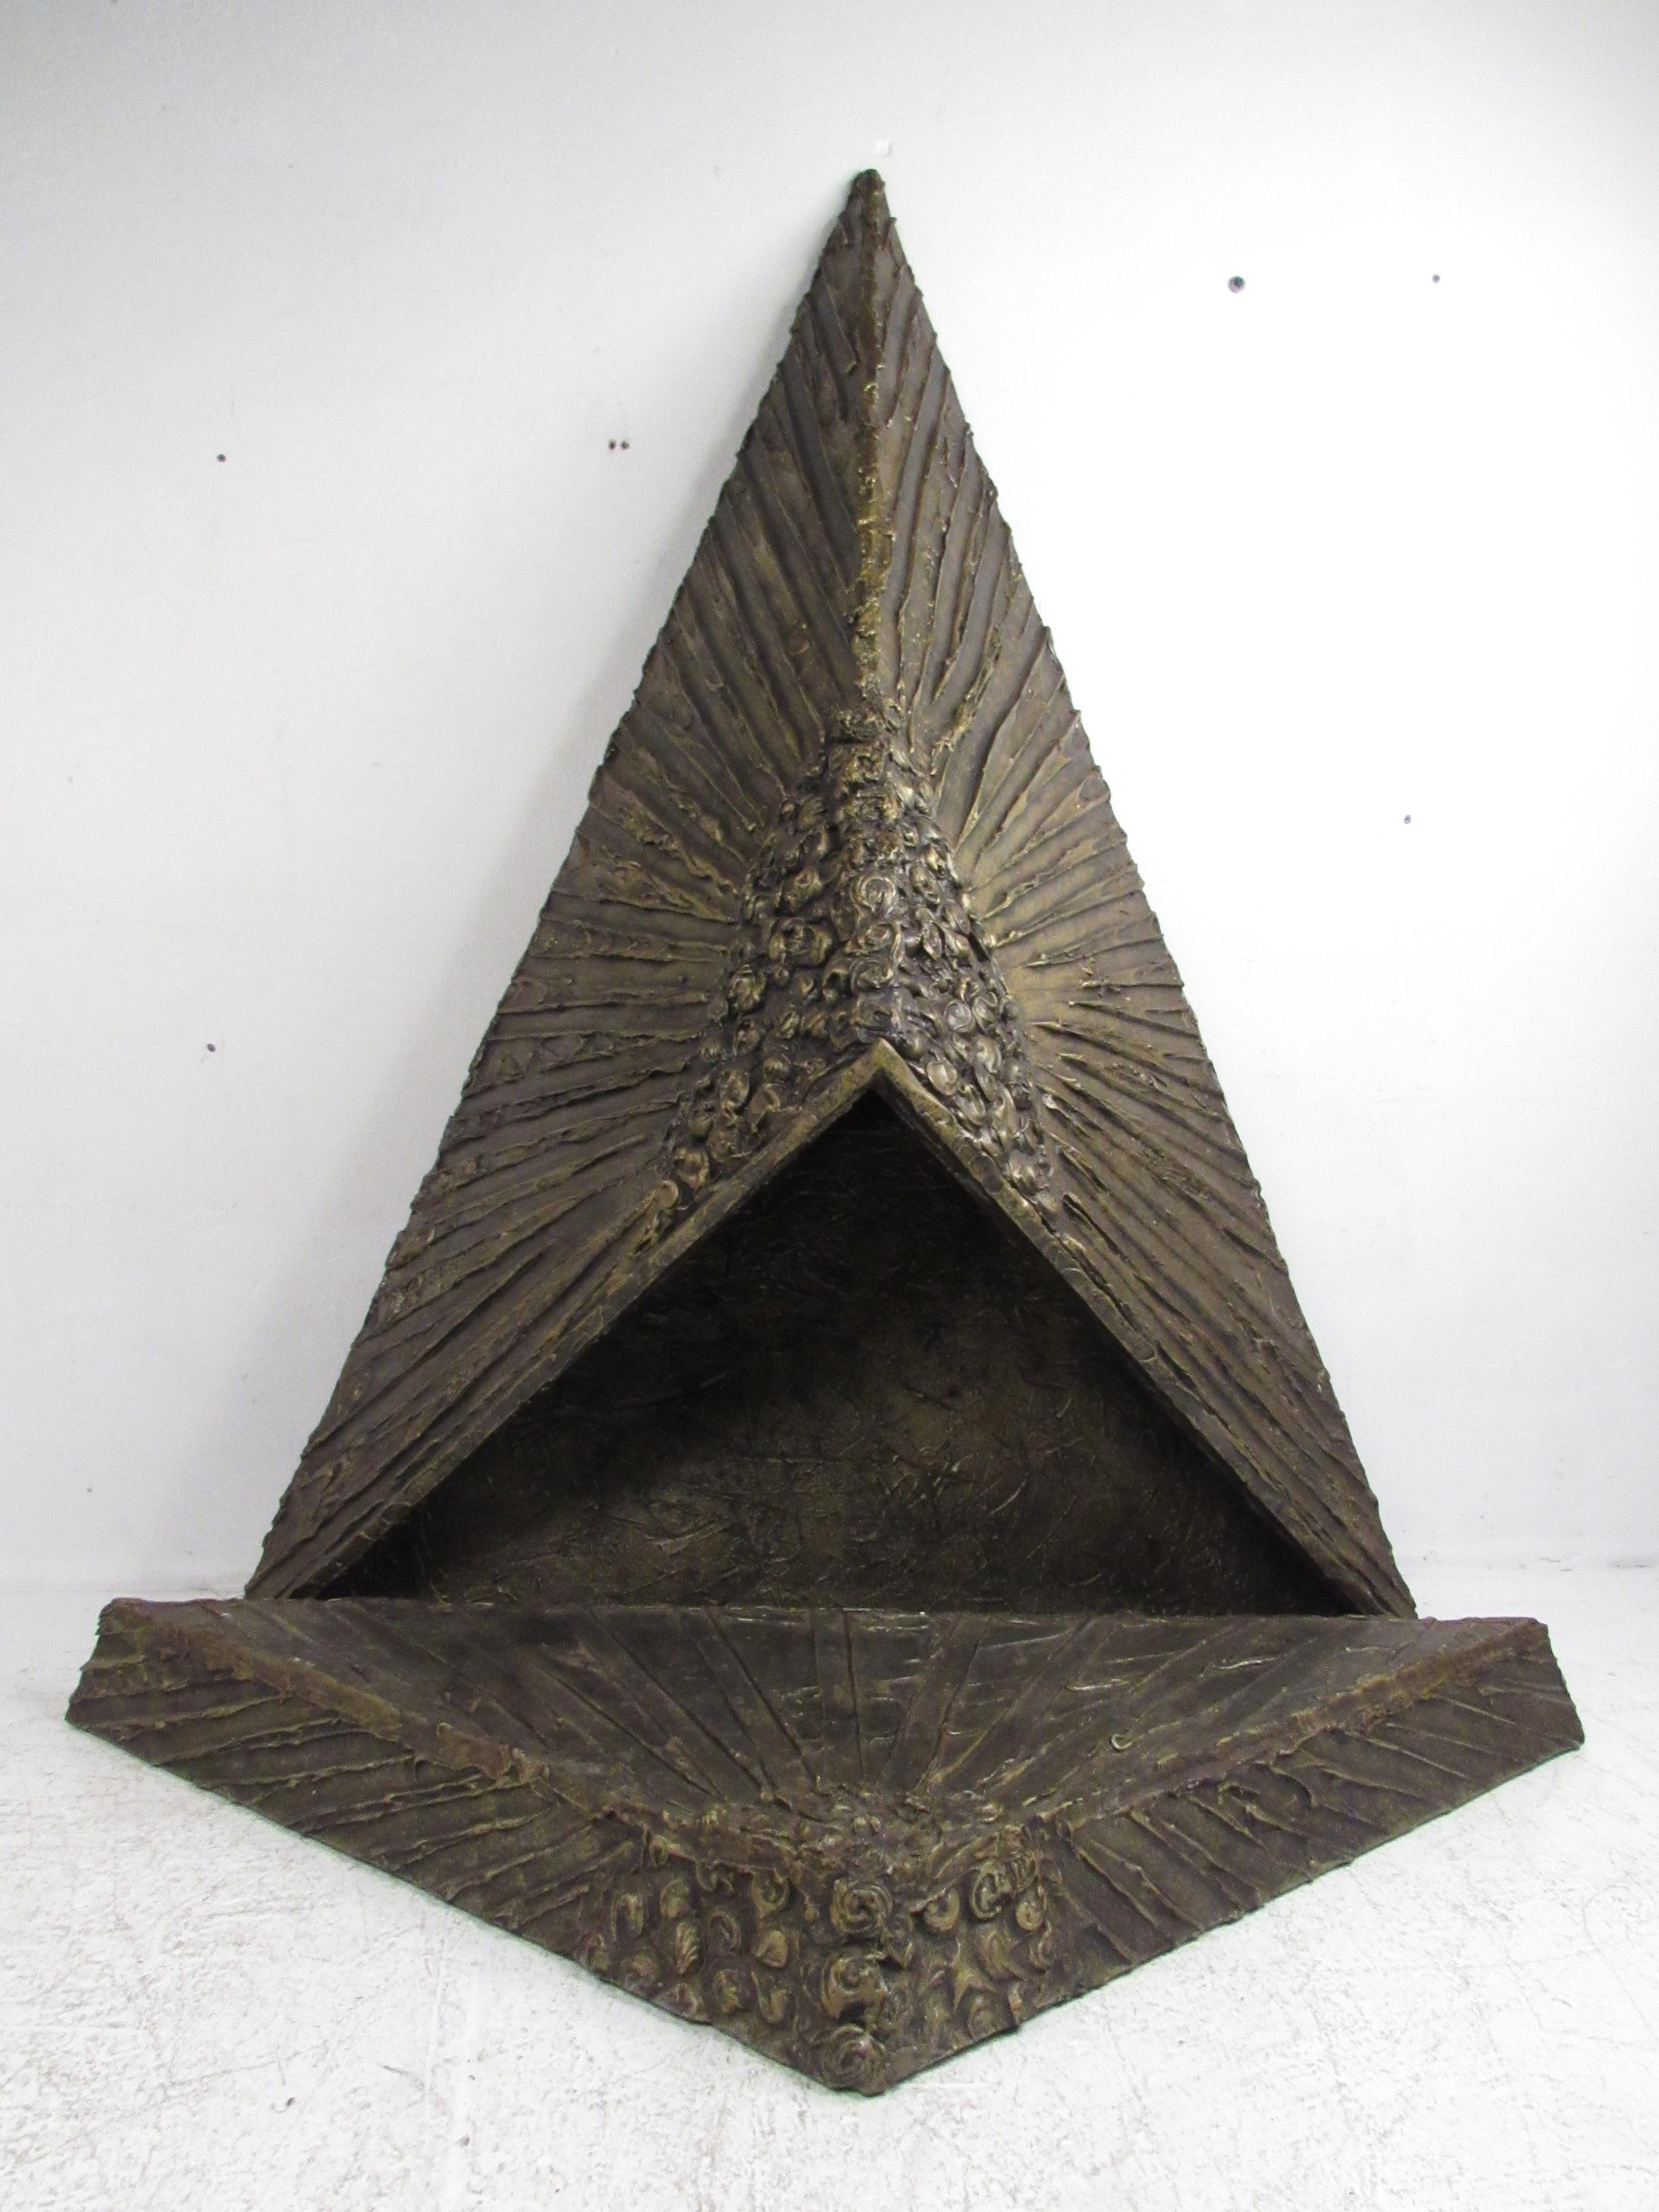 This gorgeous vintage modern fireplace was designed by Adrian Pearsall for Craft Associates. A stylish Brutalist design with carved detail on a textured resin frame. This impressive two-piece fireplace includes a three dimensional triangular top and